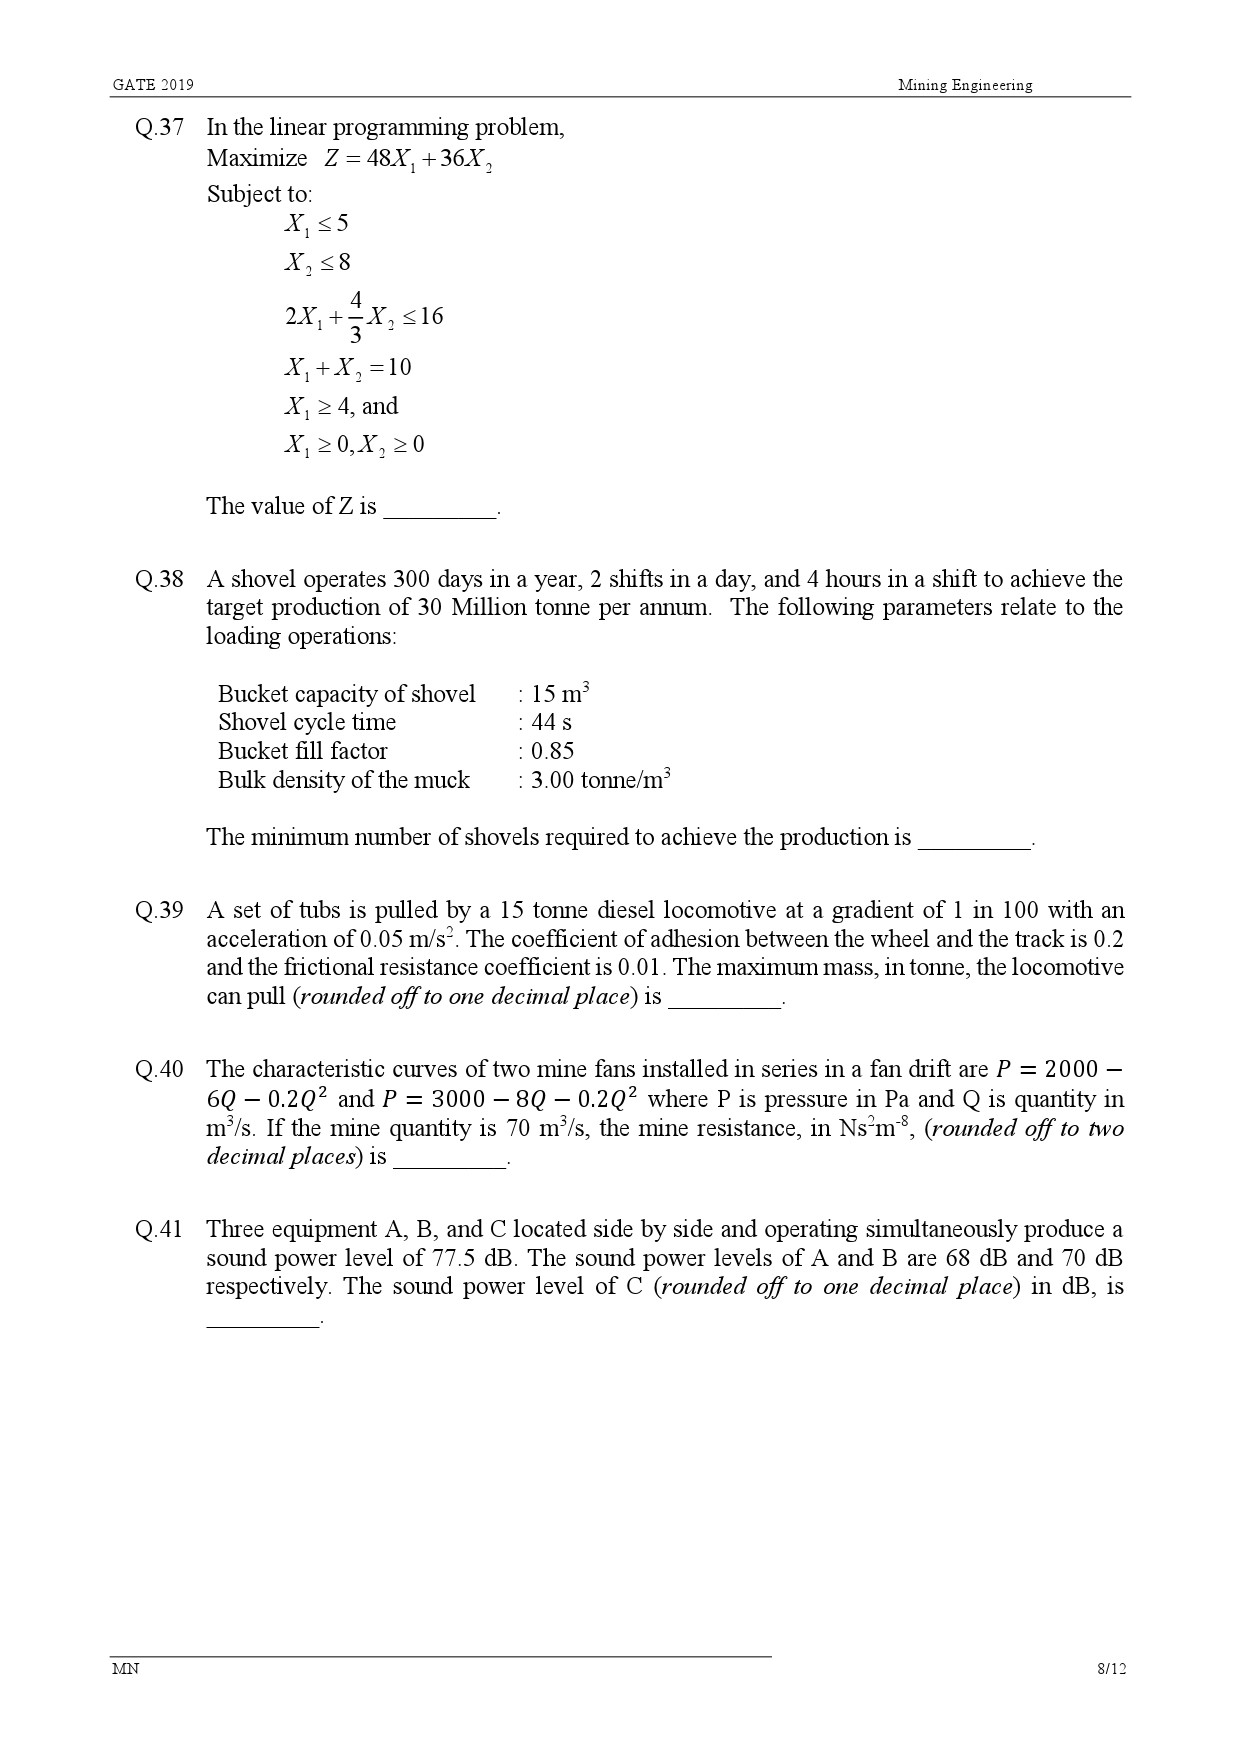 GATE Exam Question Paper 2019 Mining Engineering 11